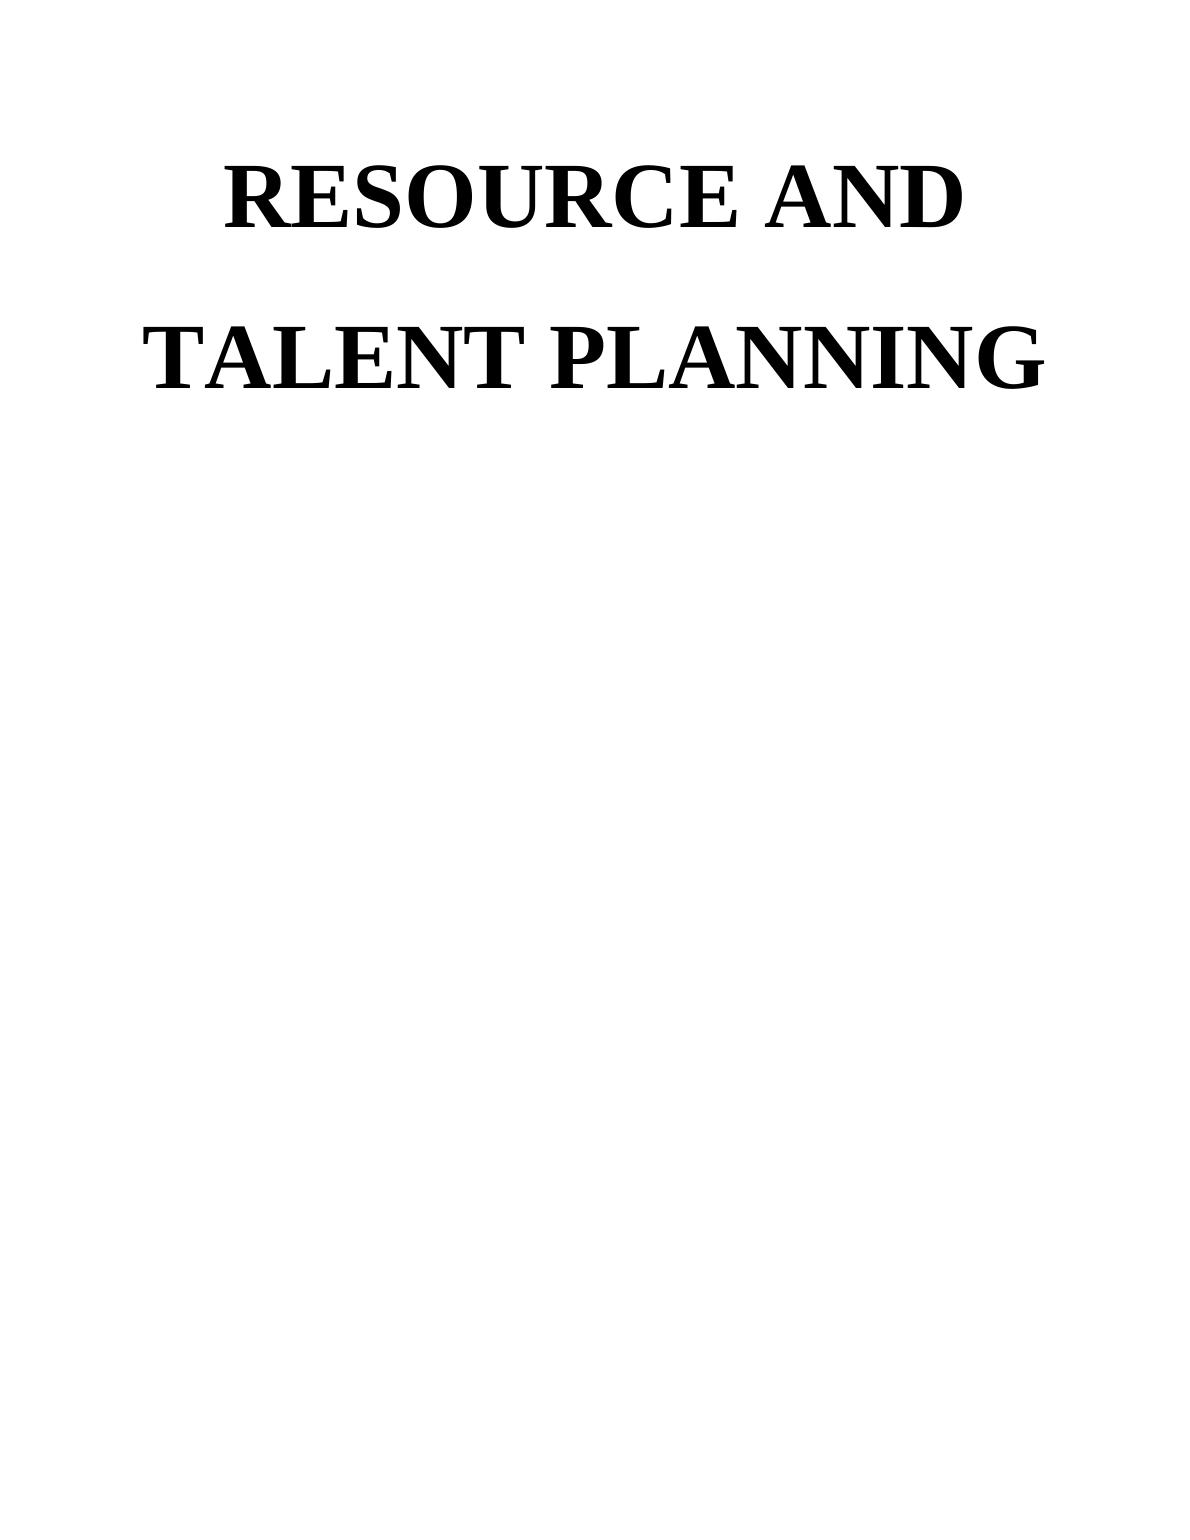 Resources and Talent Planning | Assignment_1